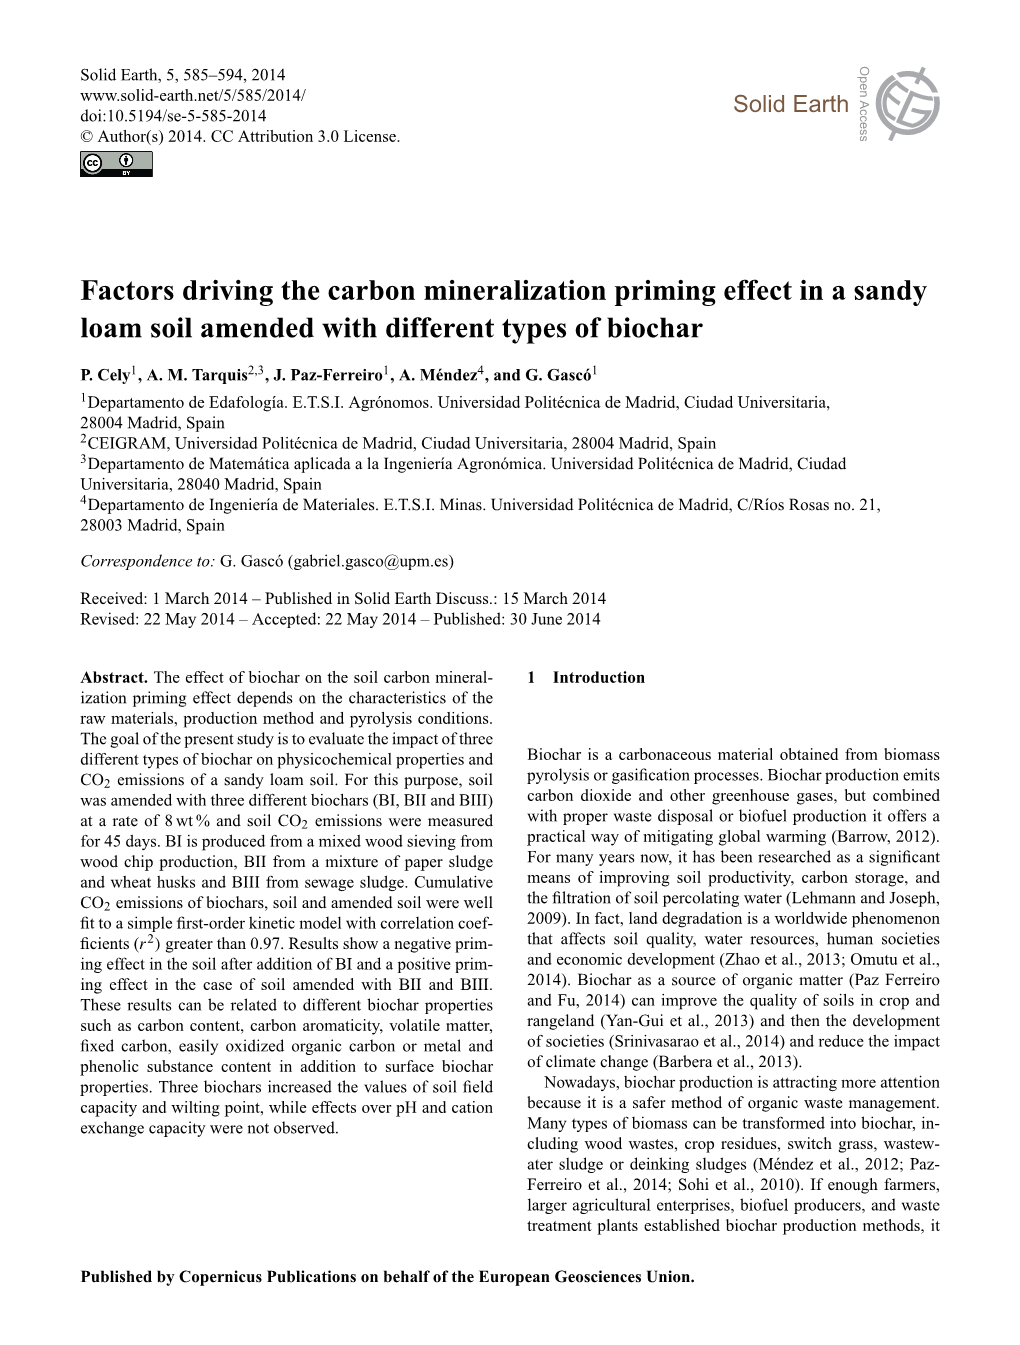 Factors Driving the Carbon Mineralization Priming Effect in a Sandy Loam Soil Amended with Different Types of Biochar